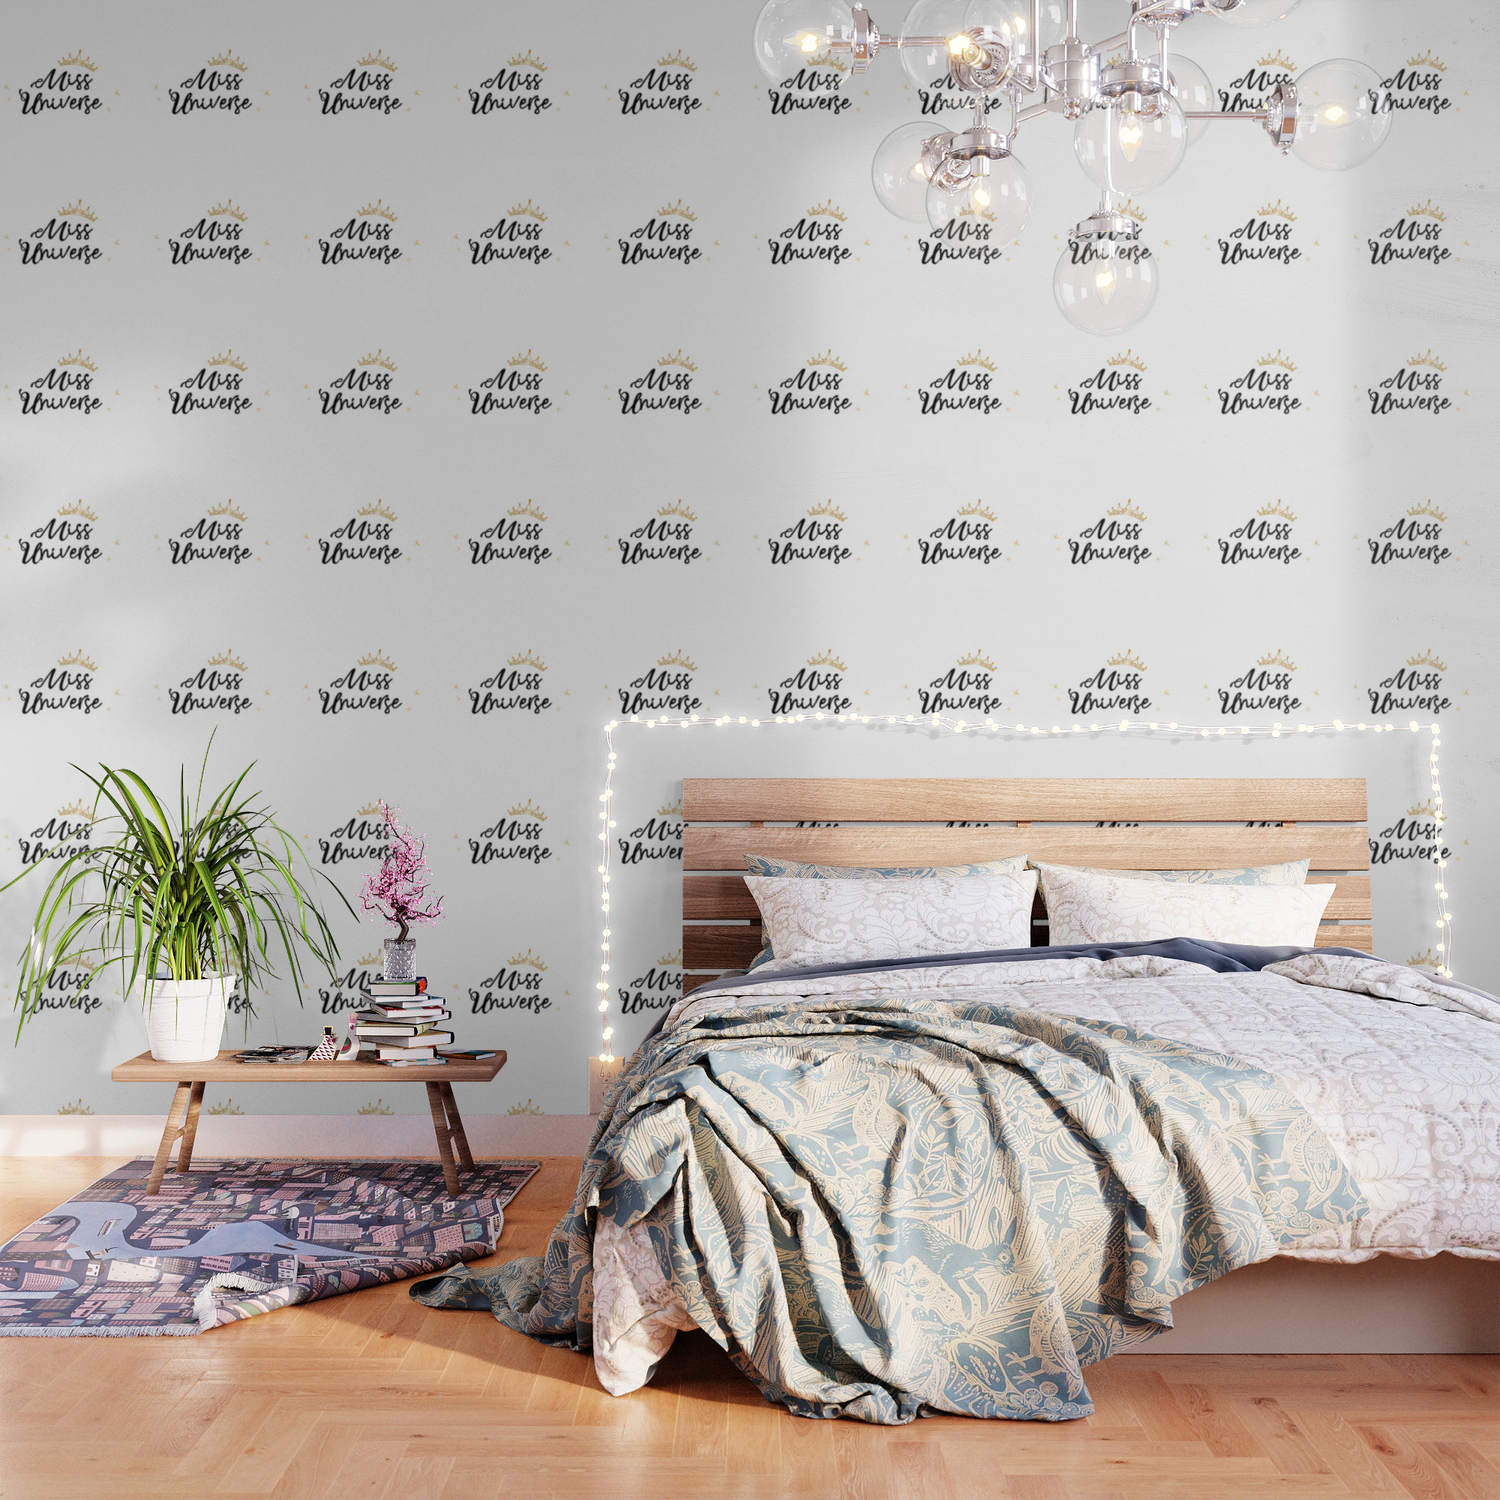 Miss Universe Wallpaper by EDMproject | Society6